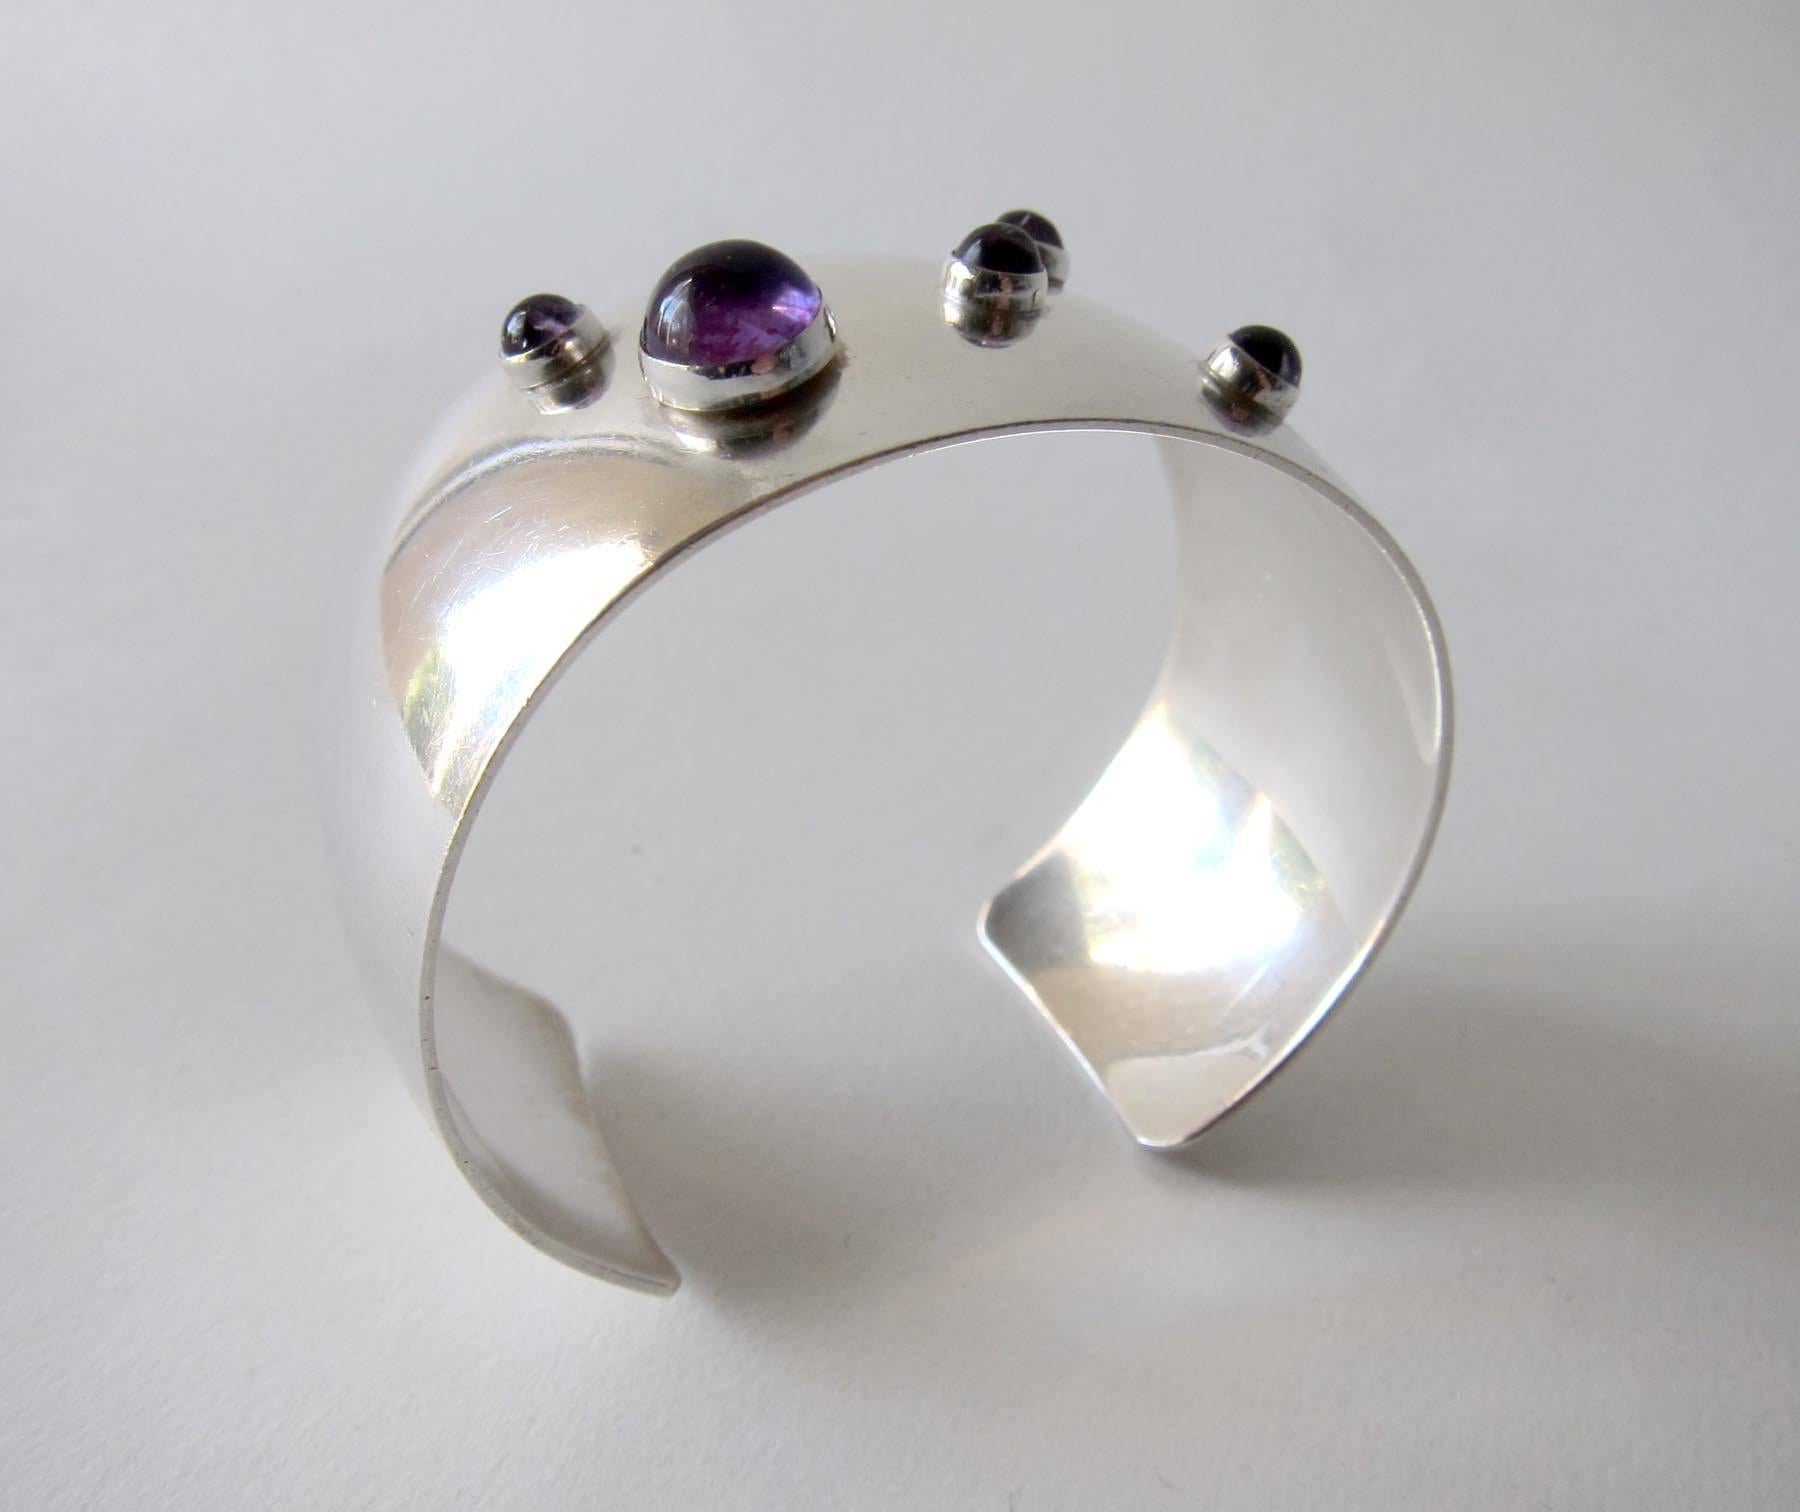 Sterling silver cuff bracelet featuring five amethyst cabochon stones created by Niels Erik From of Denmark.  Cuff measures 8